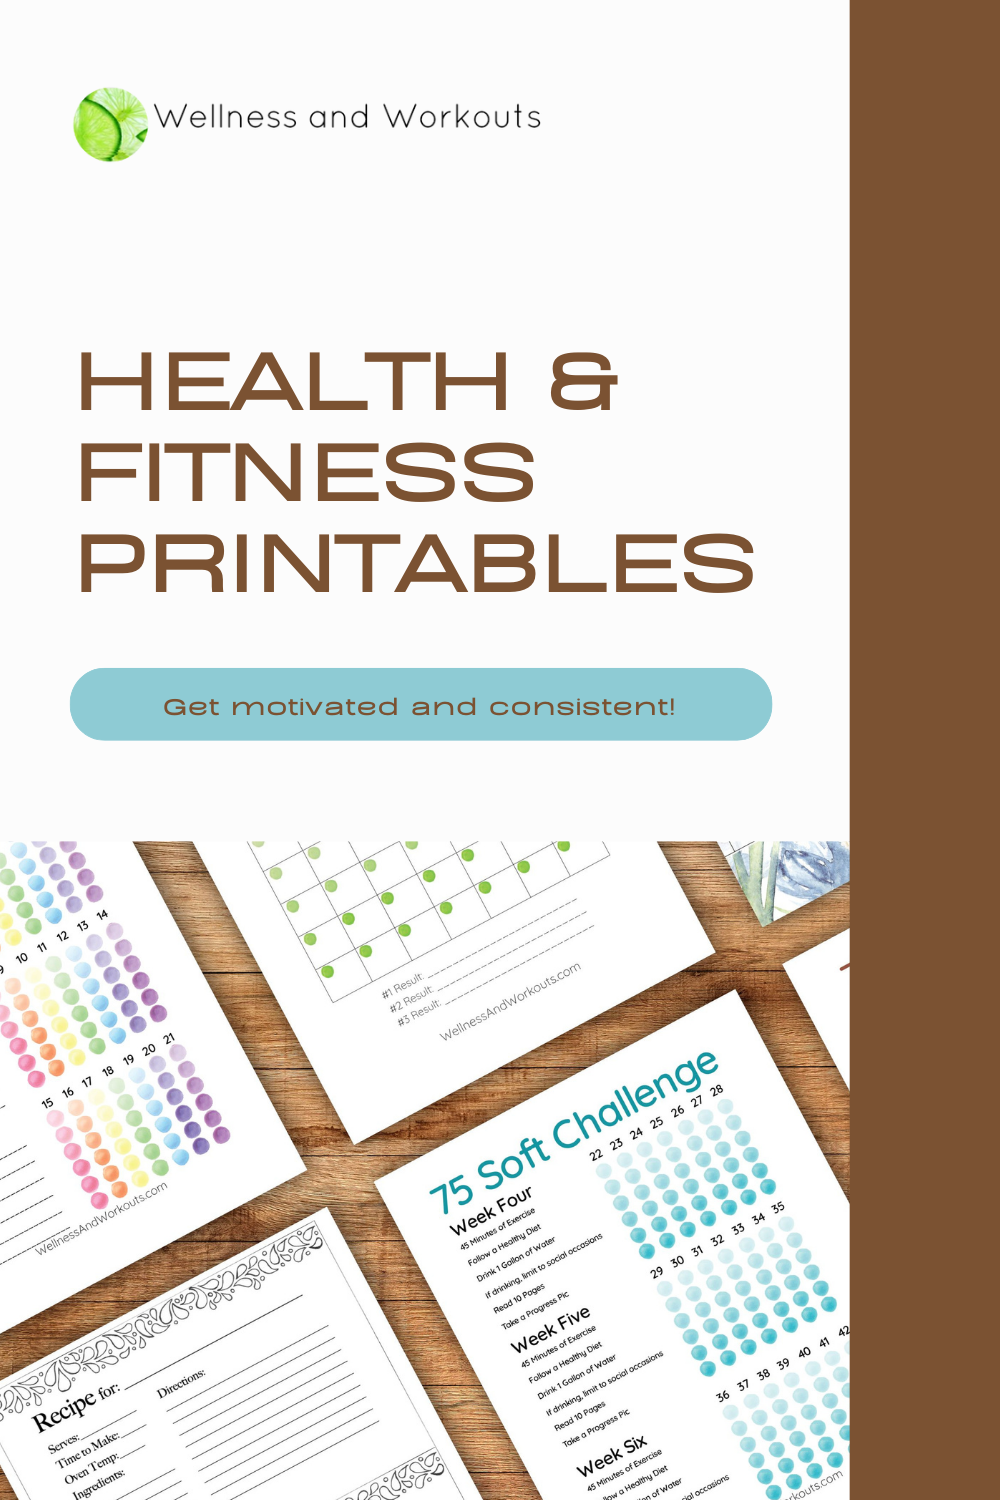 Health and Fitness Printables to Motivate and Help with Consistency